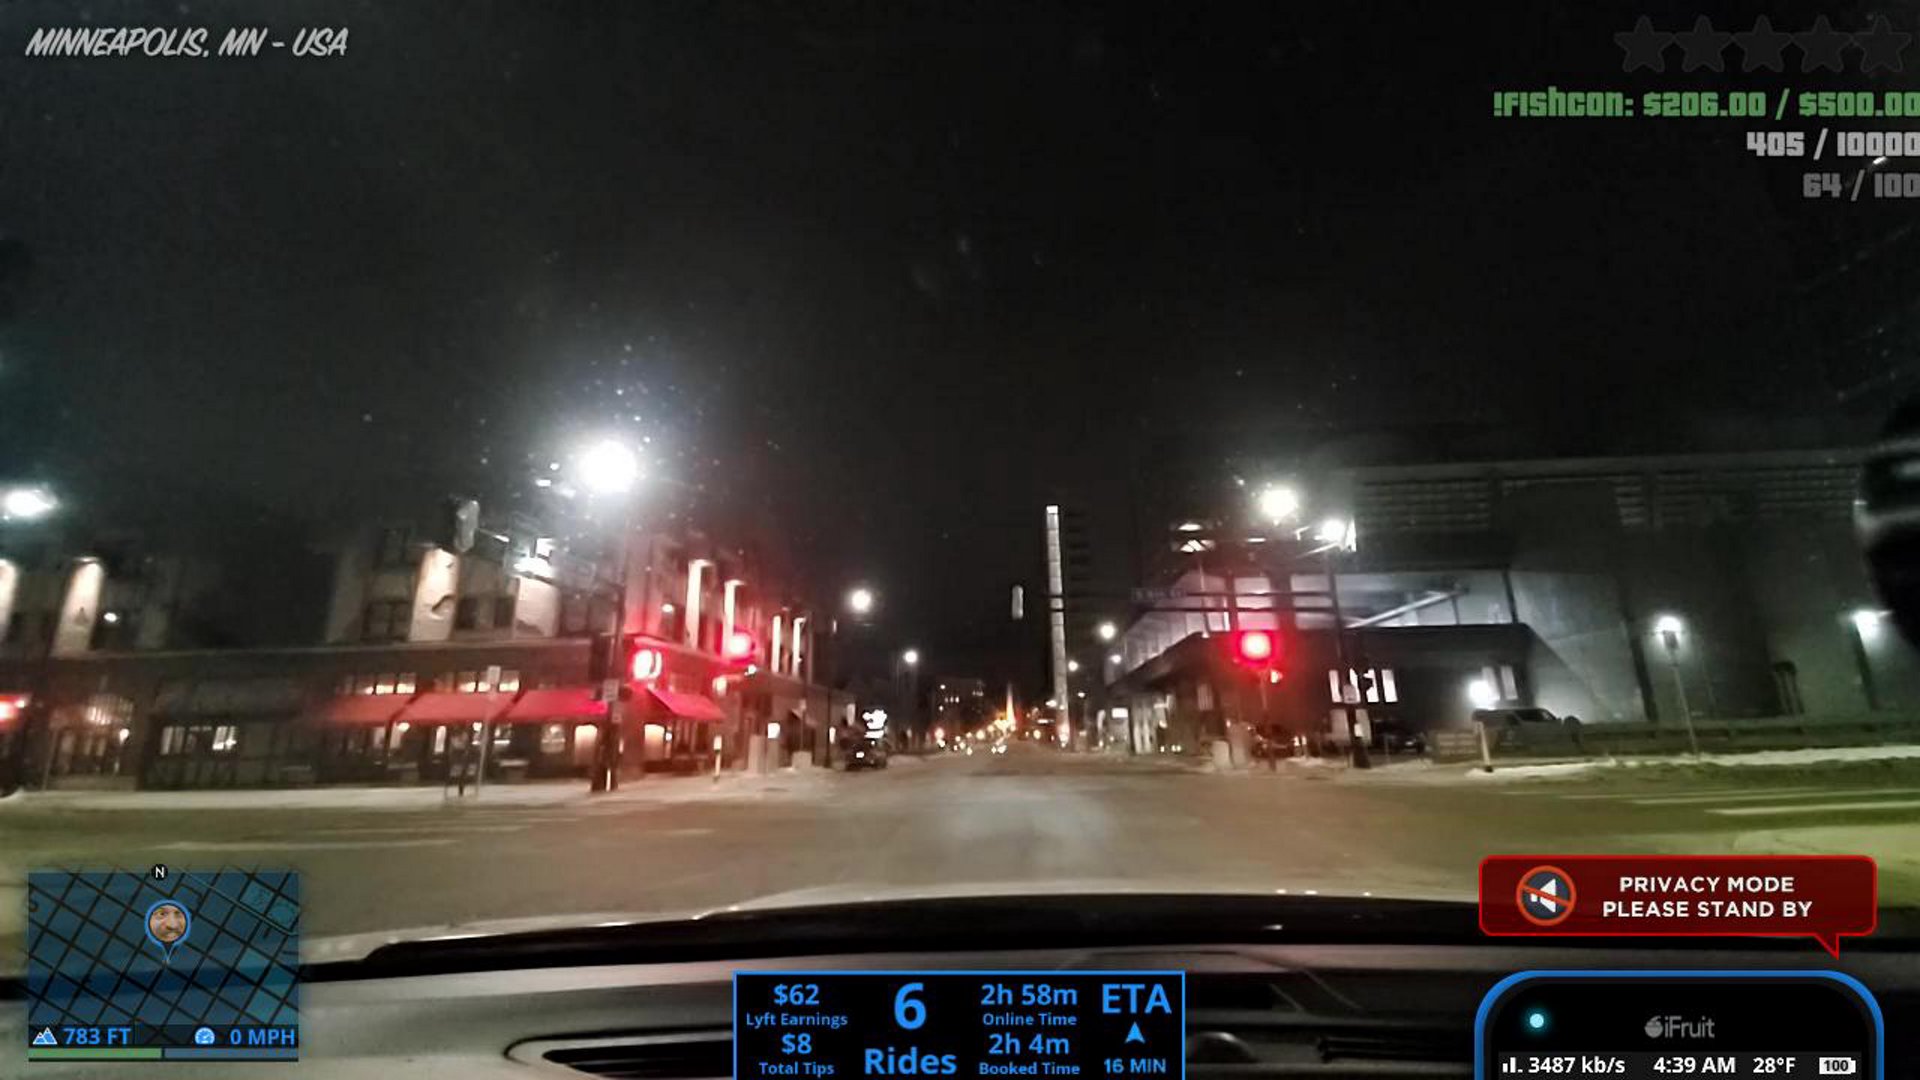 rideshare-roadcam-pov-mn-usa-fishcon-plunges-help-just-chatting-0601-https-t-co-vjn2wd8jqp-https-t-co-nytynywmox